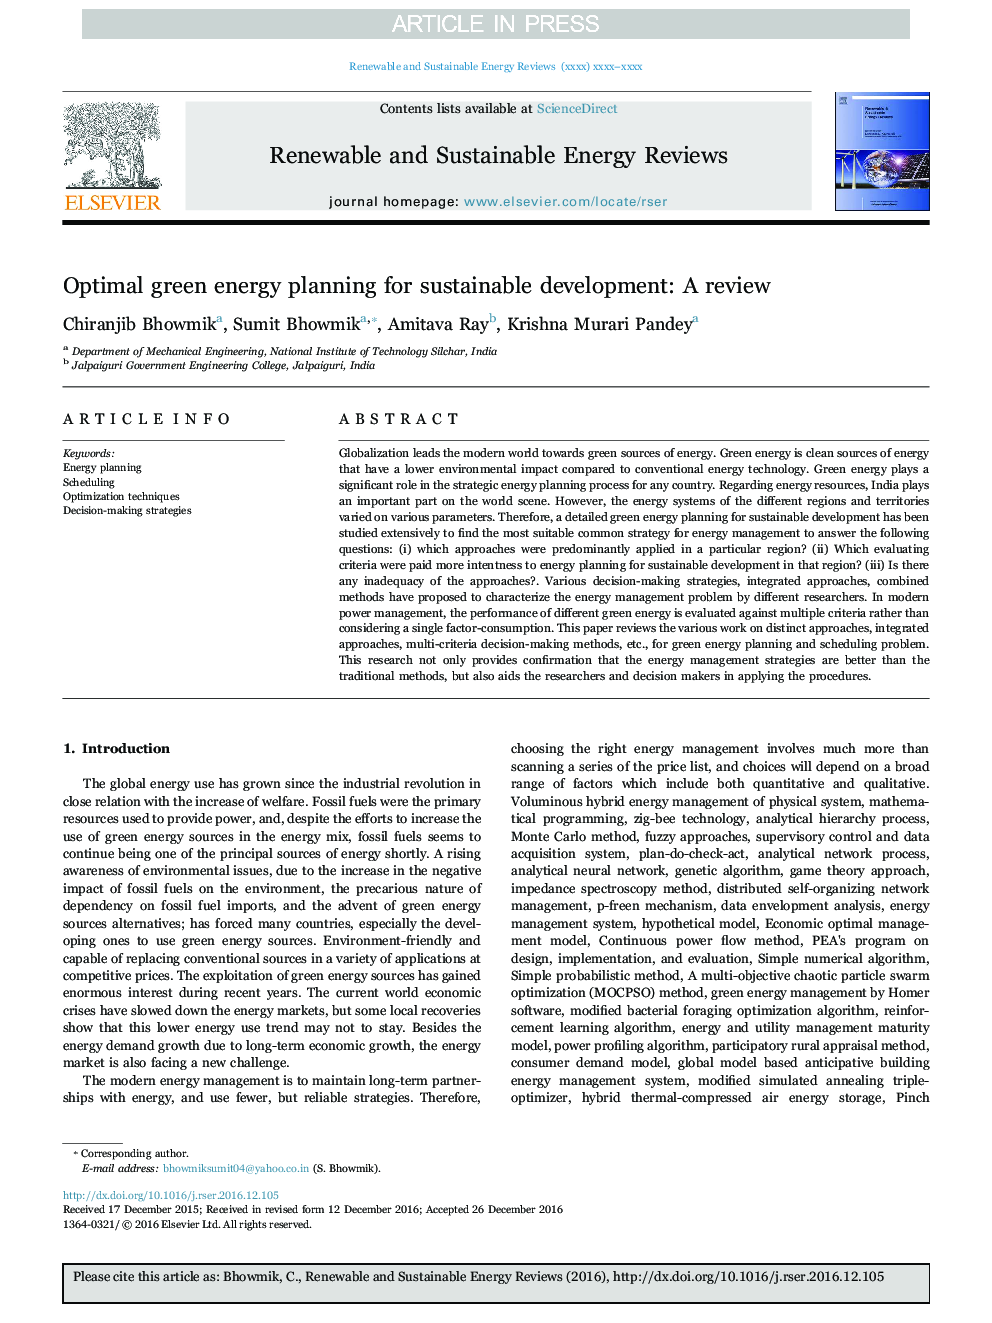 Optimal green energy planning for sustainable development: A review